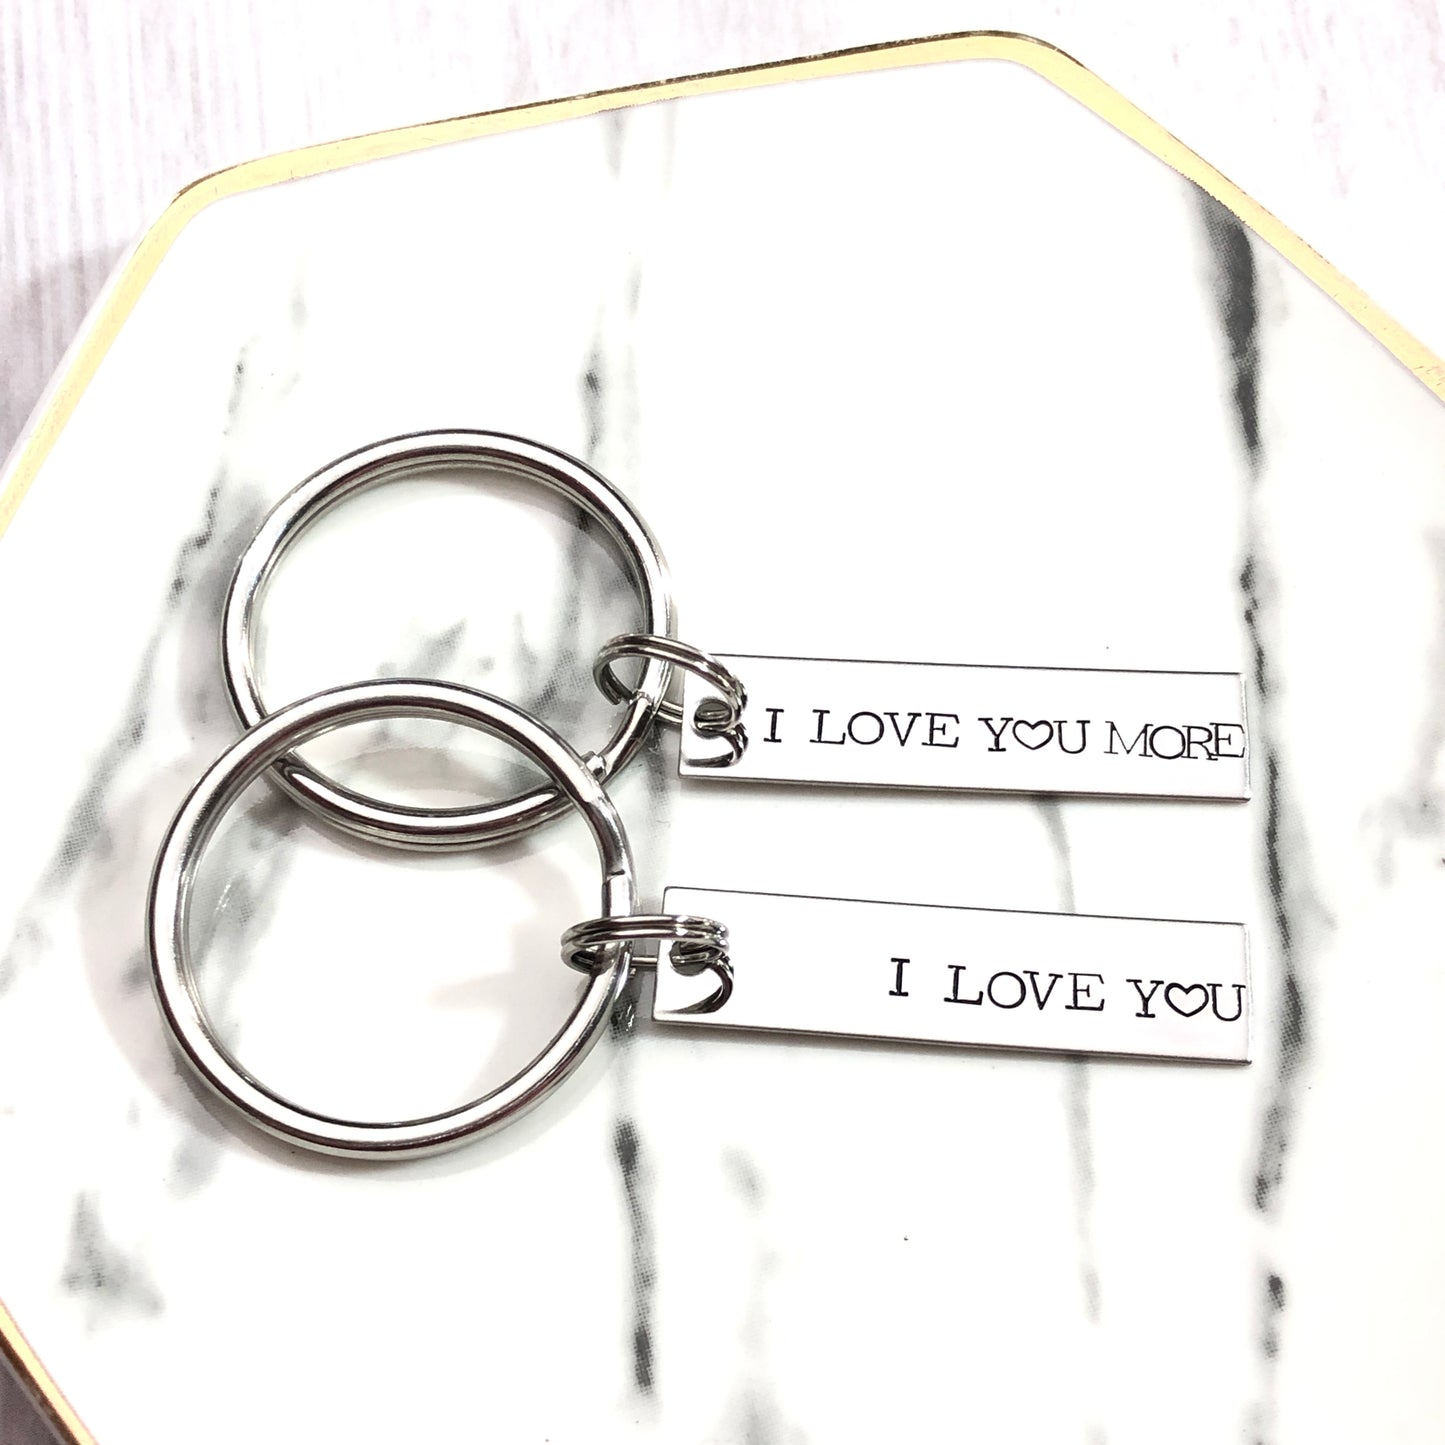 I LOVE YOU THE MOST KEYCHAIN SET